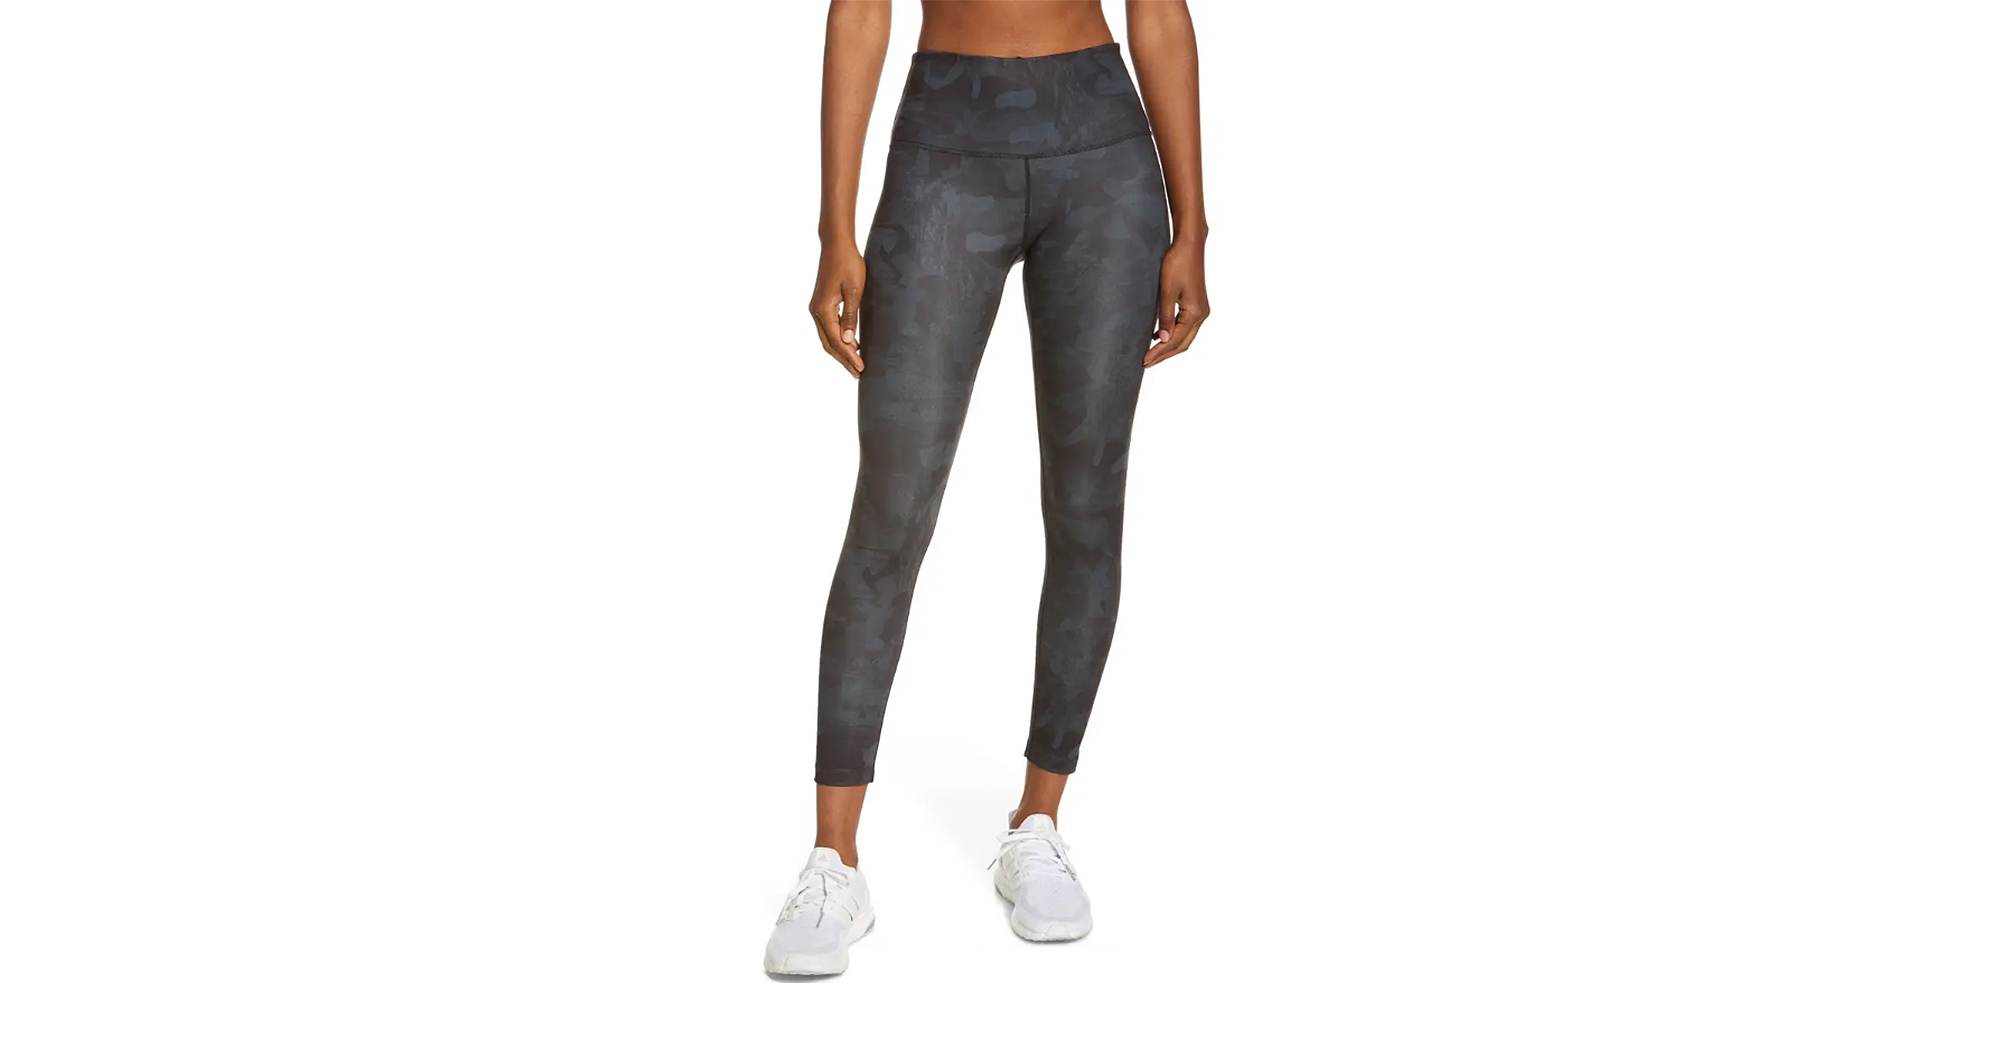 Selling Fast! These Zella Leggings Are Essential Picks in the